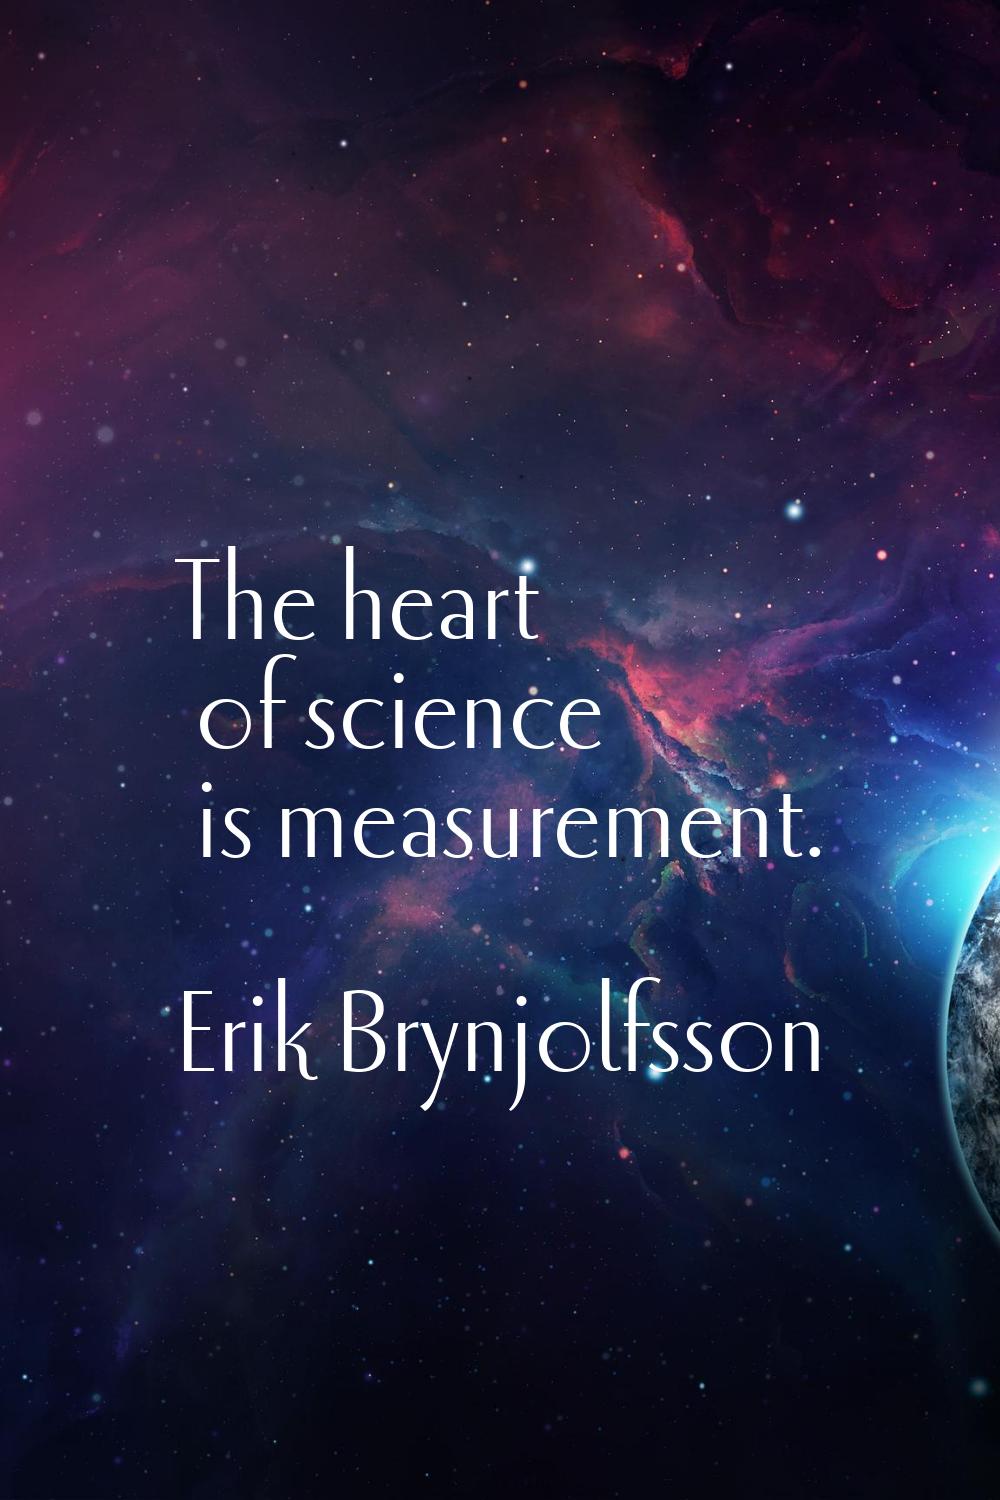 The heart of science is measurement.